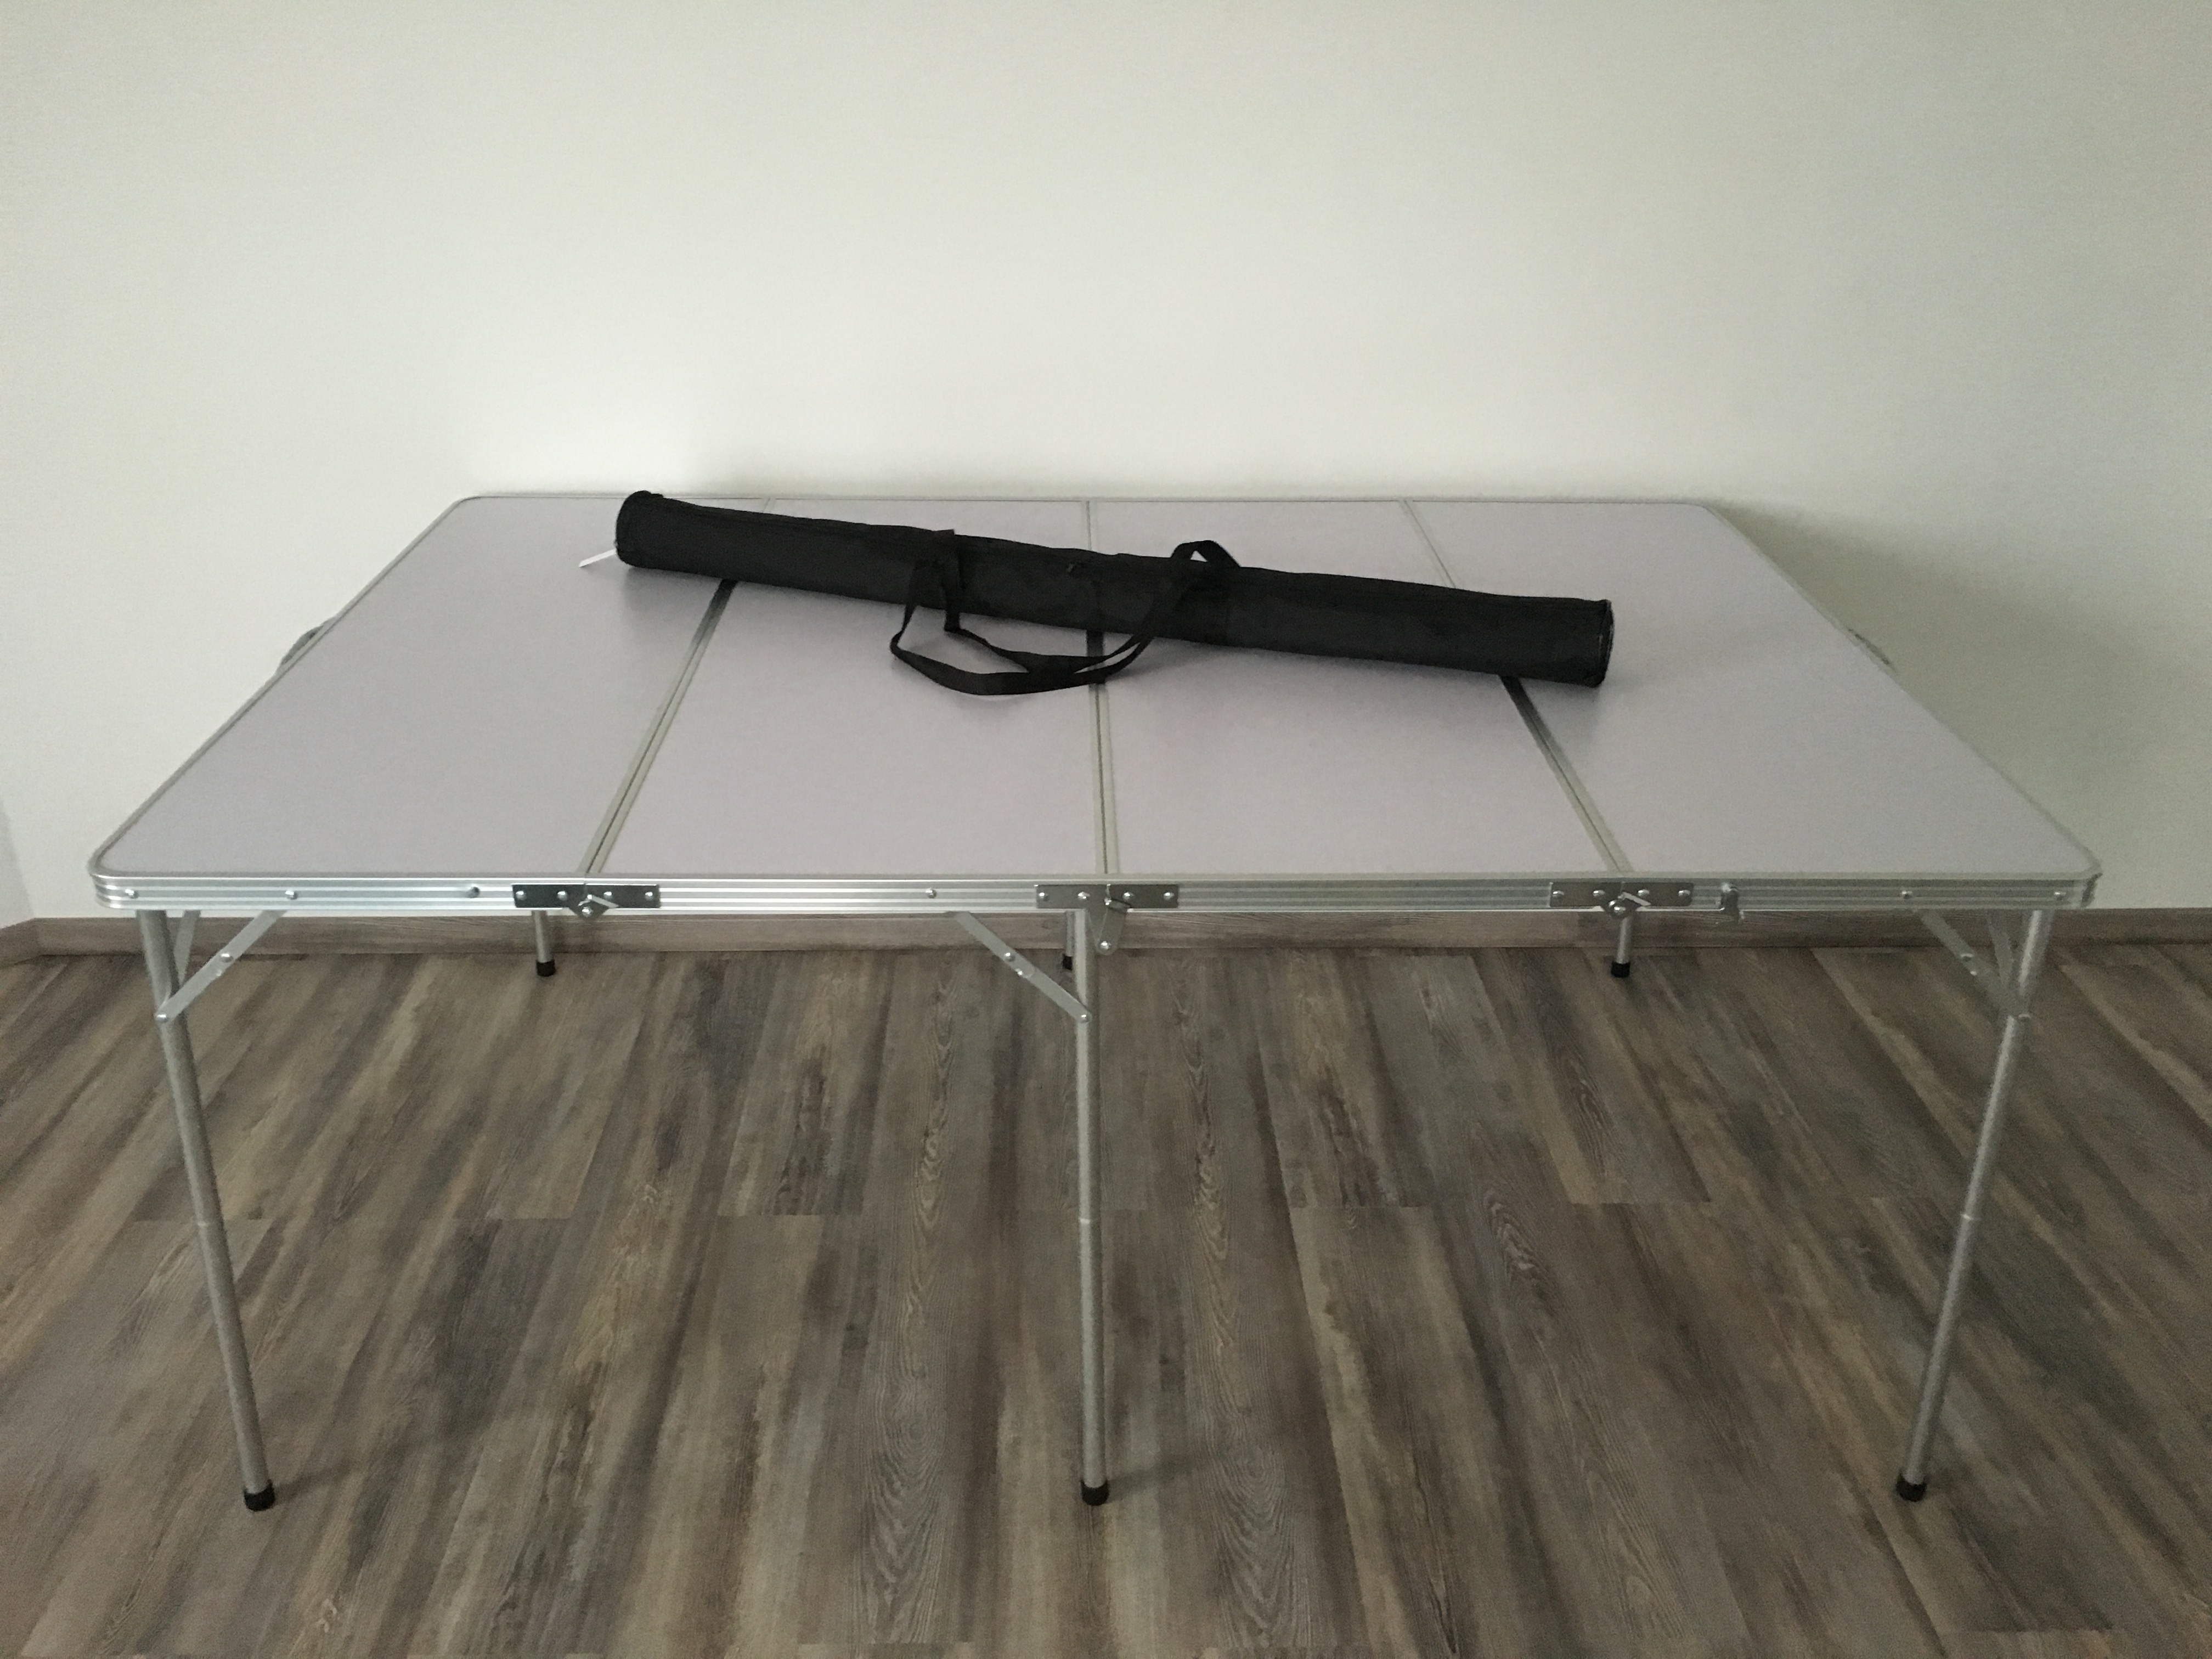 6’x4′ portable folding GAMING TABLE available now